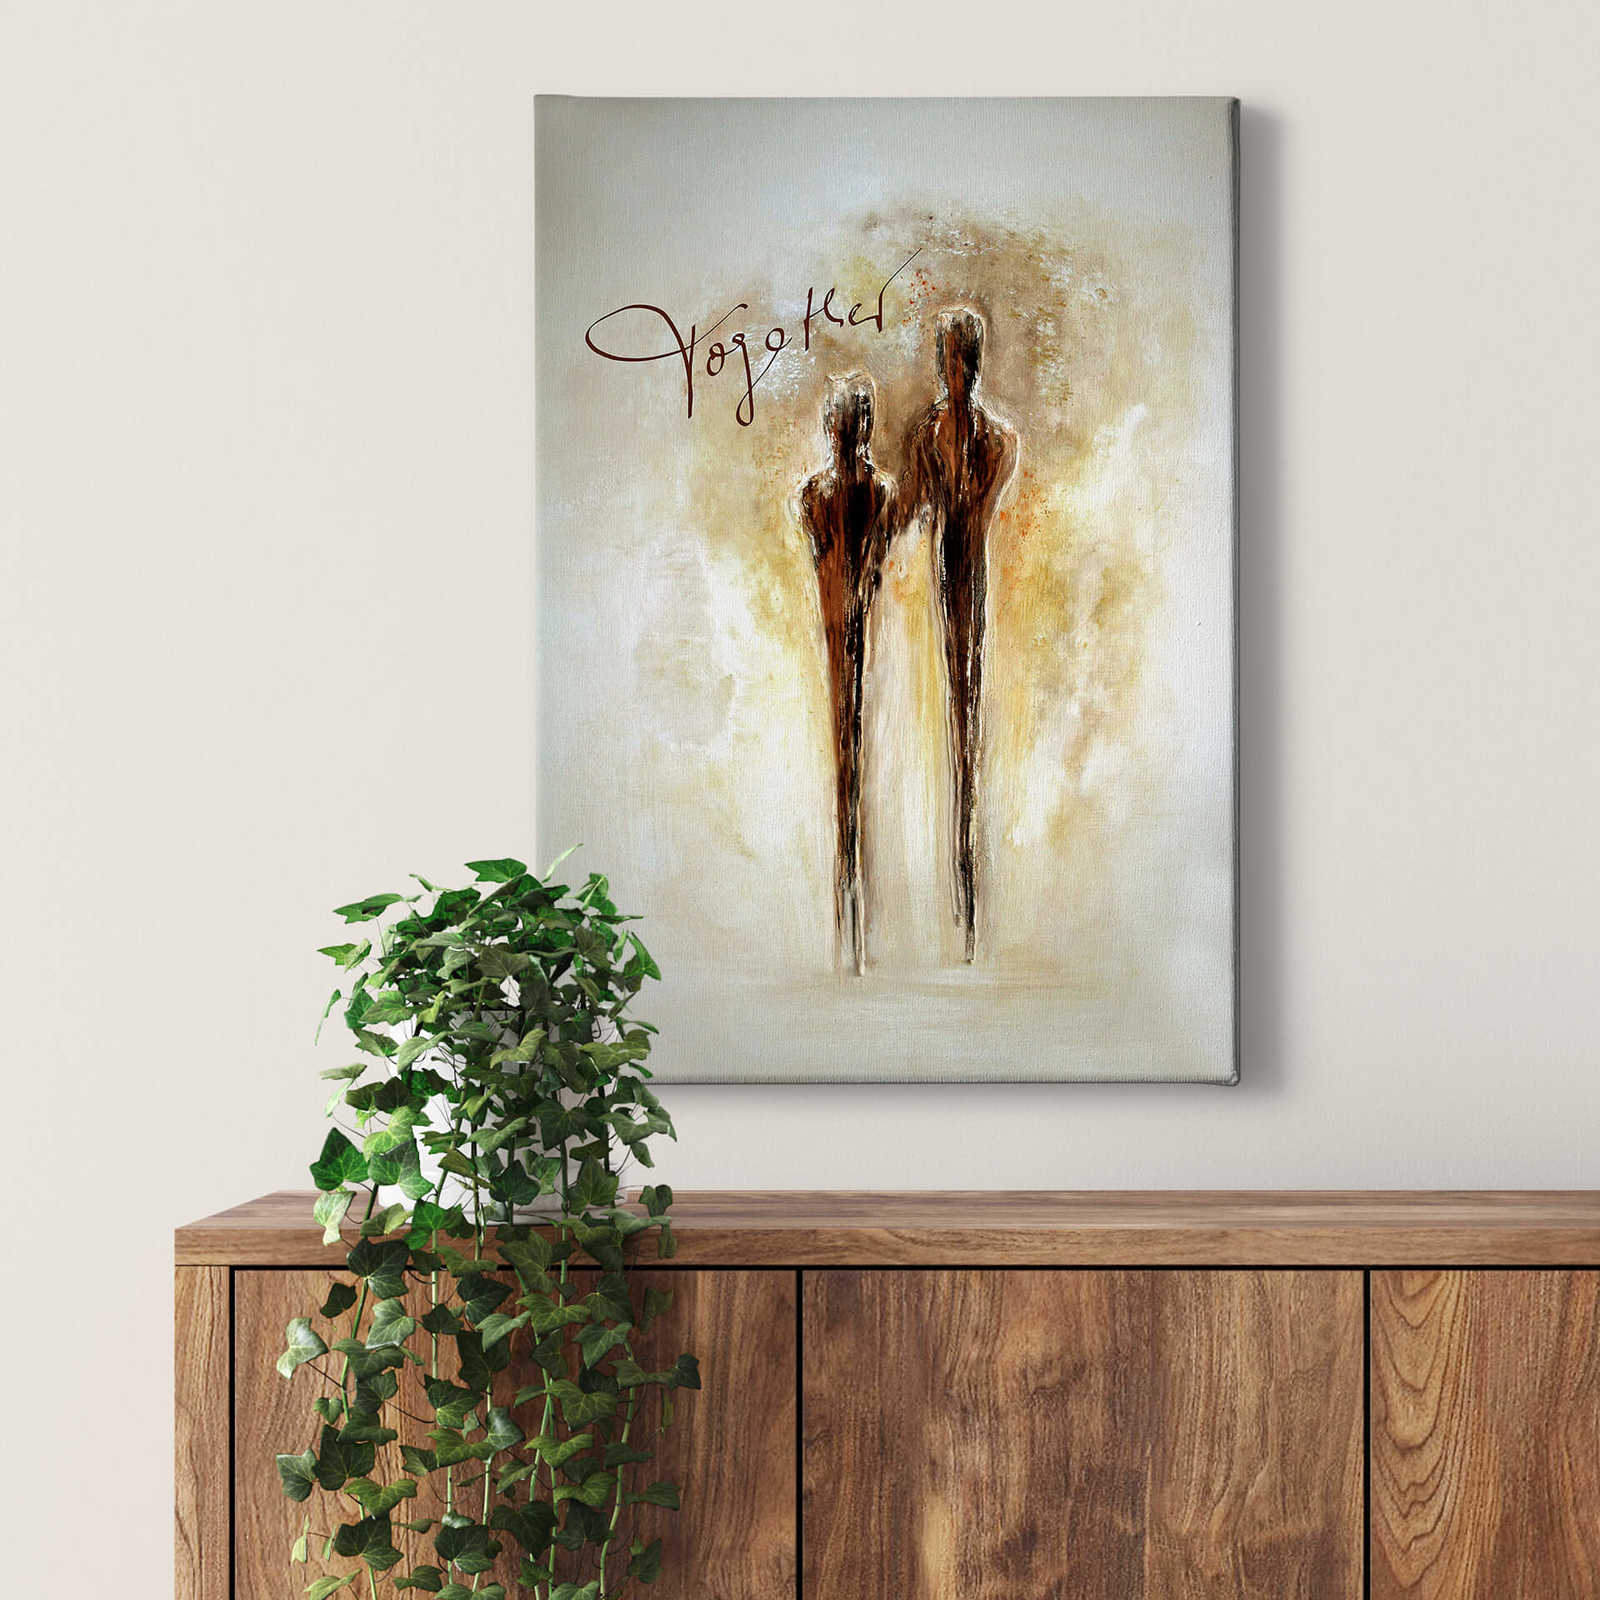             Canvas print art by Tina Melz "Together", portrait format
        